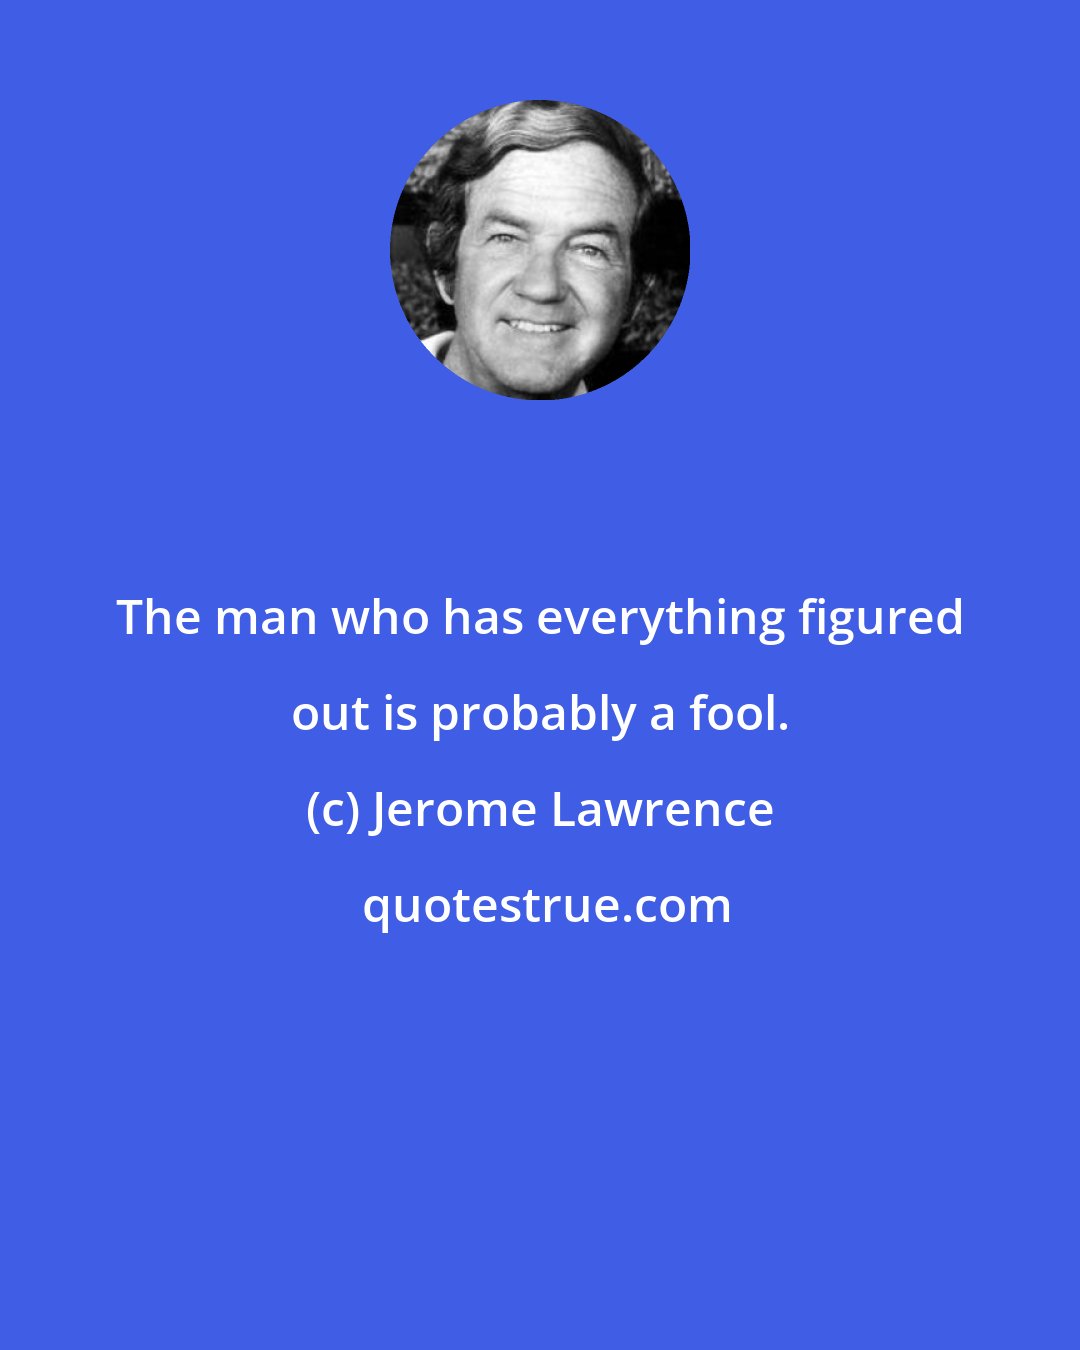 Jerome Lawrence: The man who has everything figured out is probably a fool.